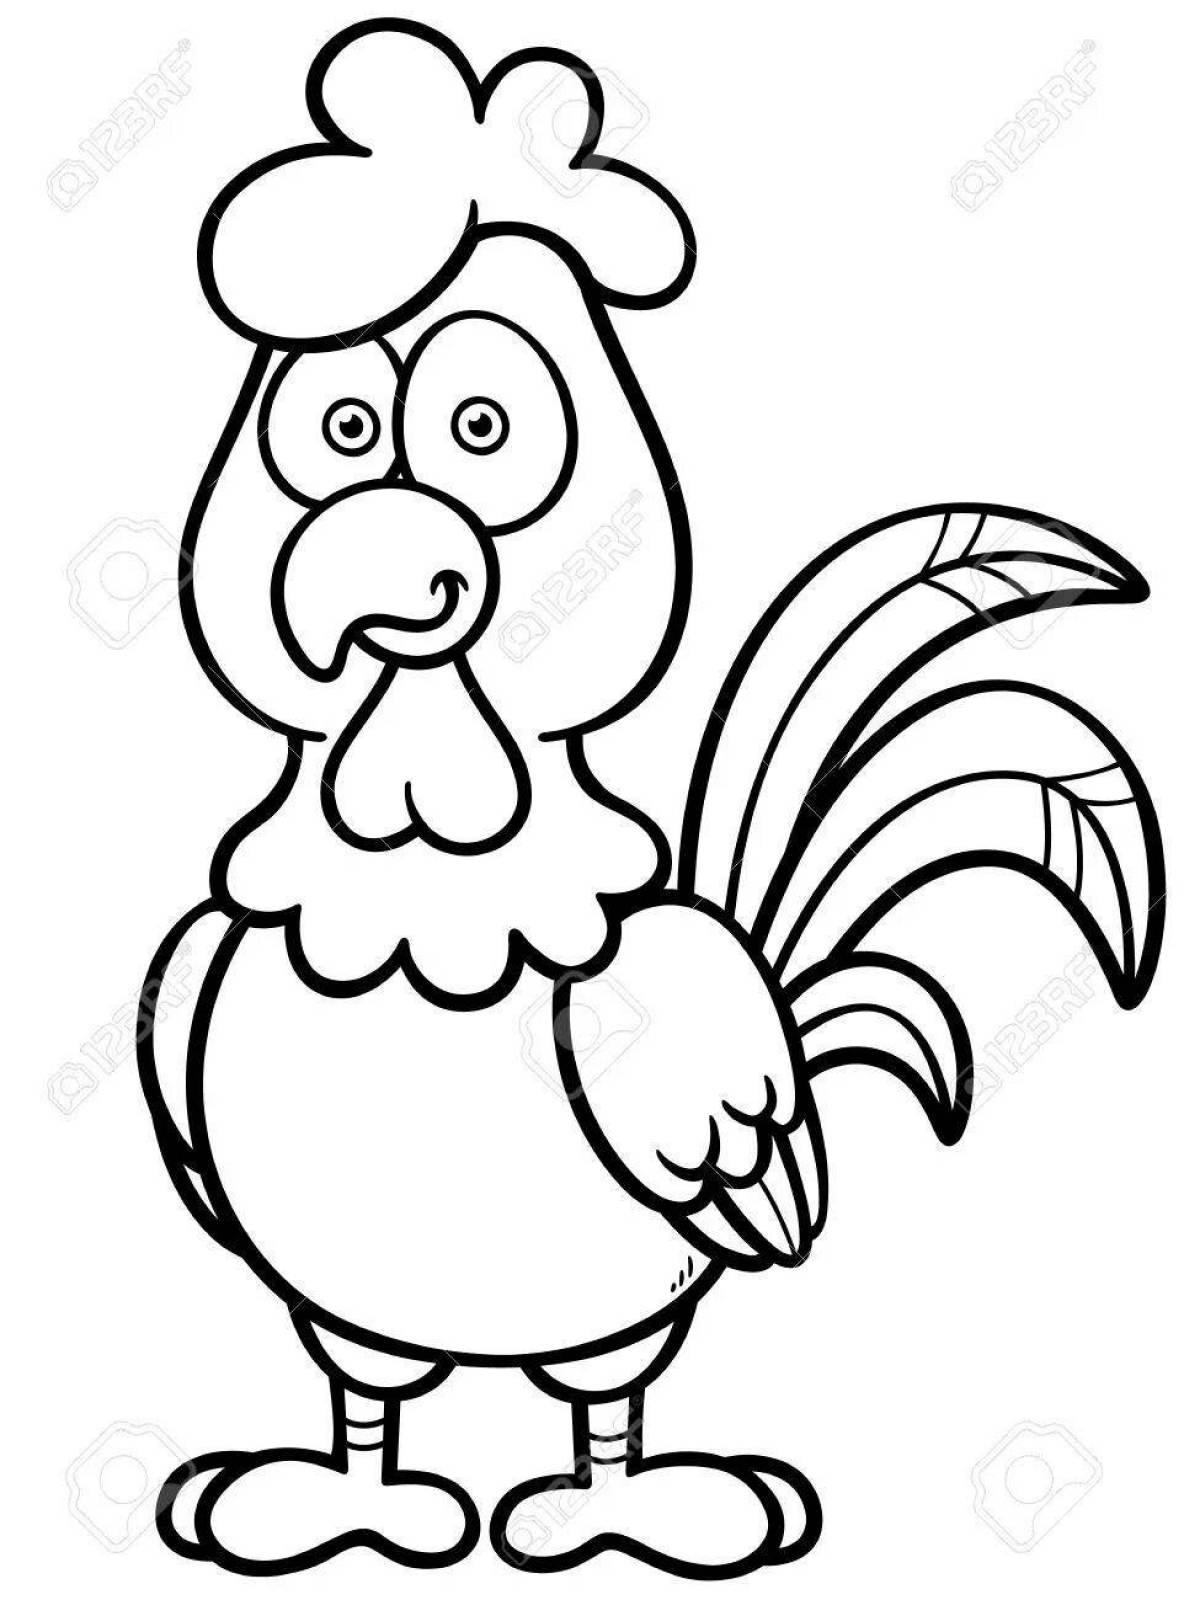 Sweet rooster coloring page for kids